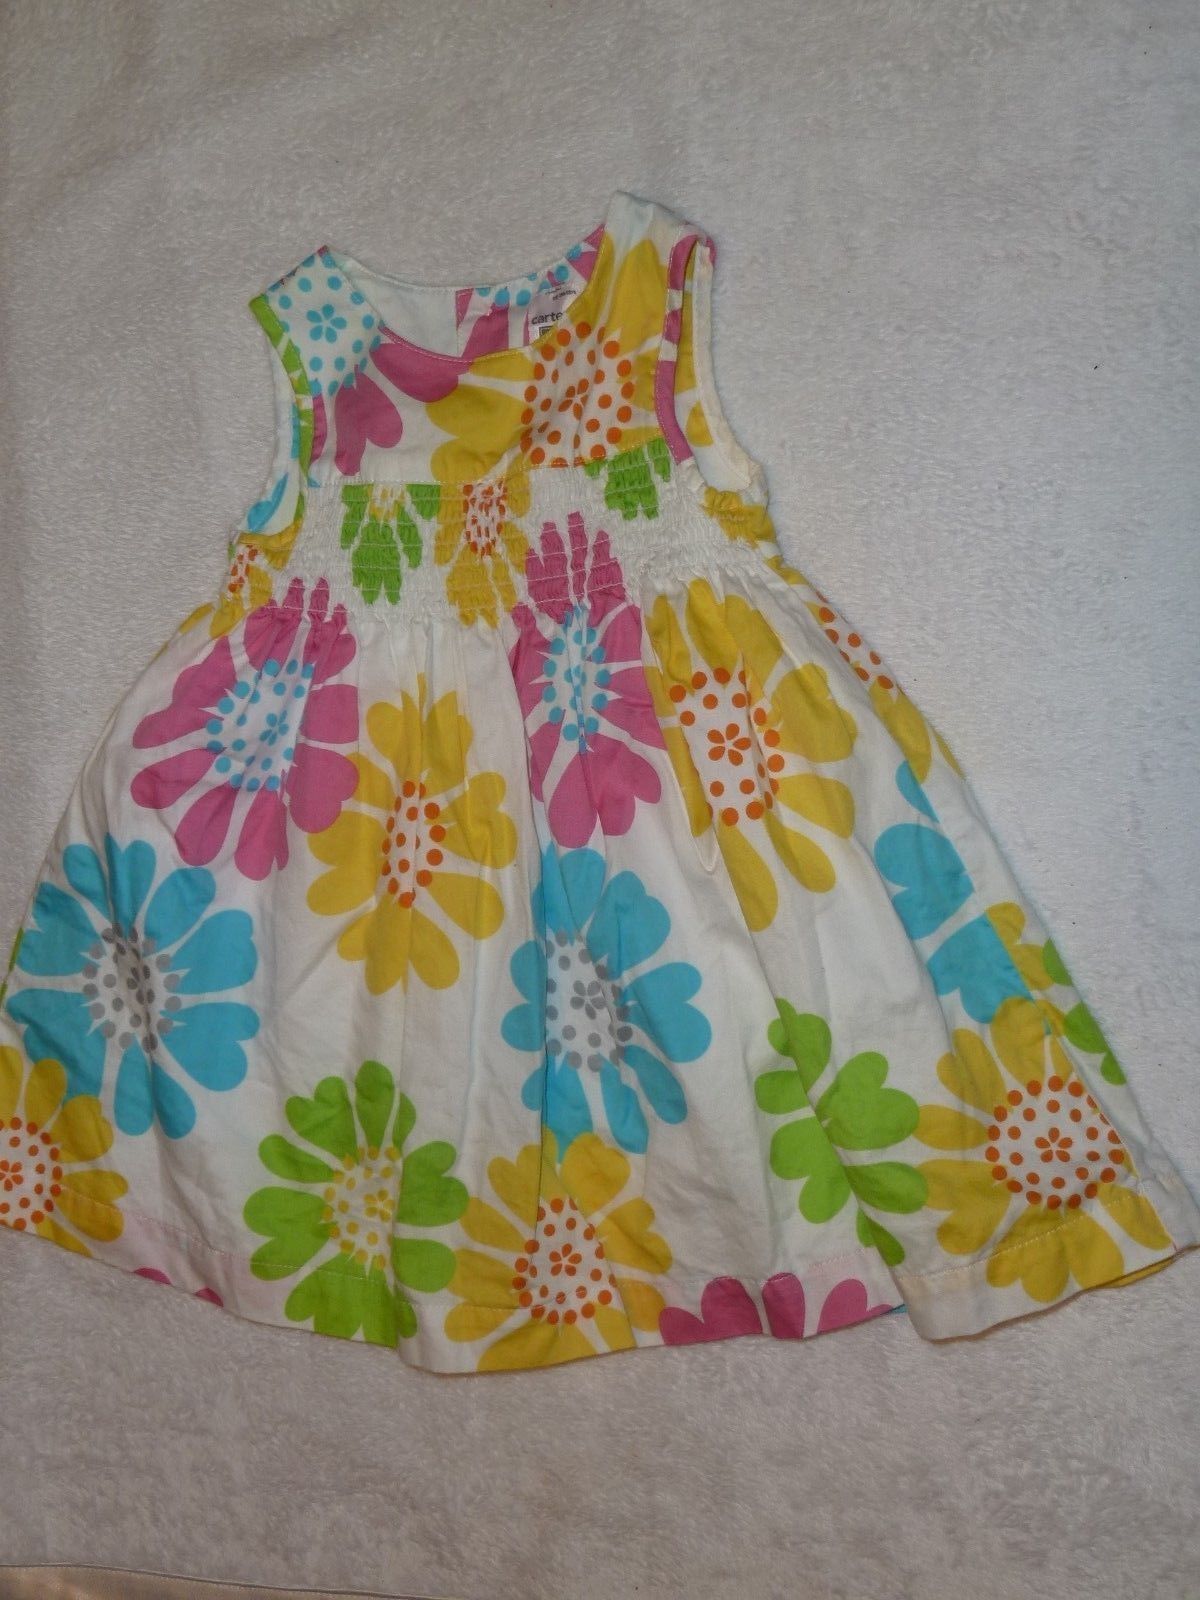 Primary image for CARTERS BABY GIRL SUMMER FLOWER BRIGHT CITRUS COLOR SUN DRESS SUNDRESS 6-12 MOS